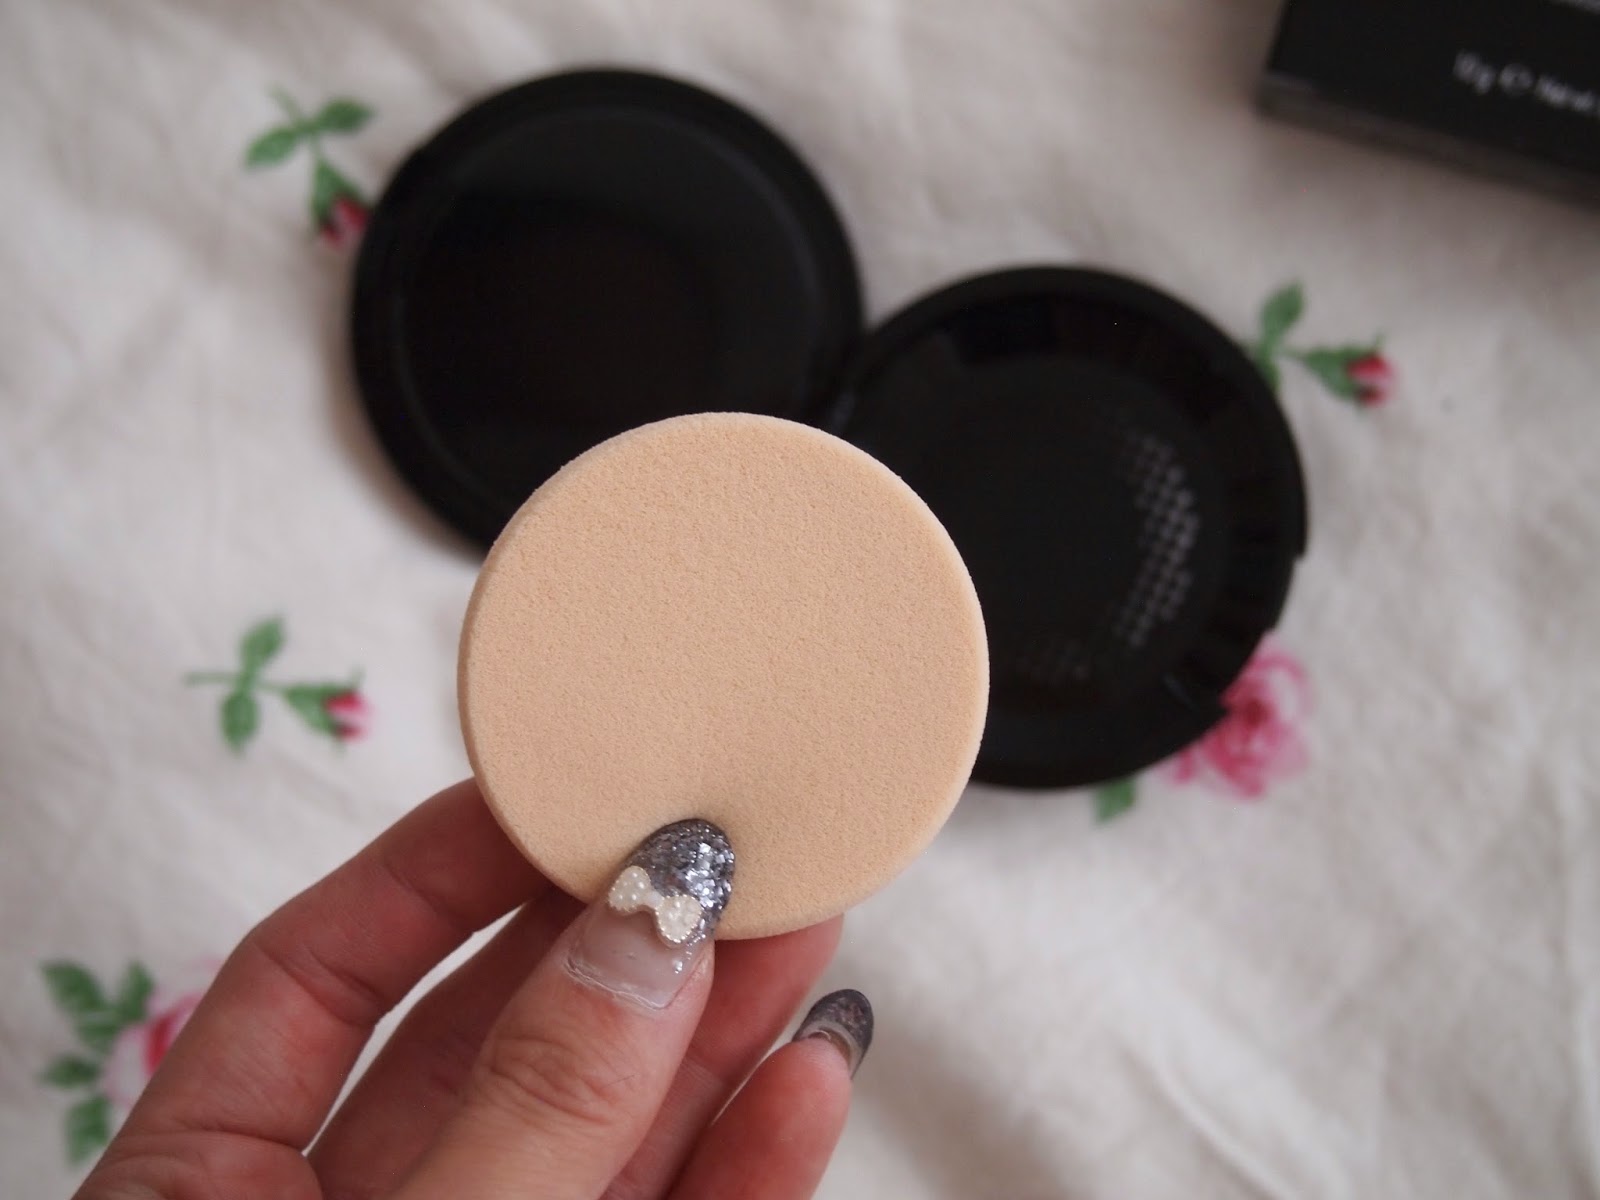 MAKE UP FOR EVER Pro Finish Multi-Use Powder Foundation - Reviews